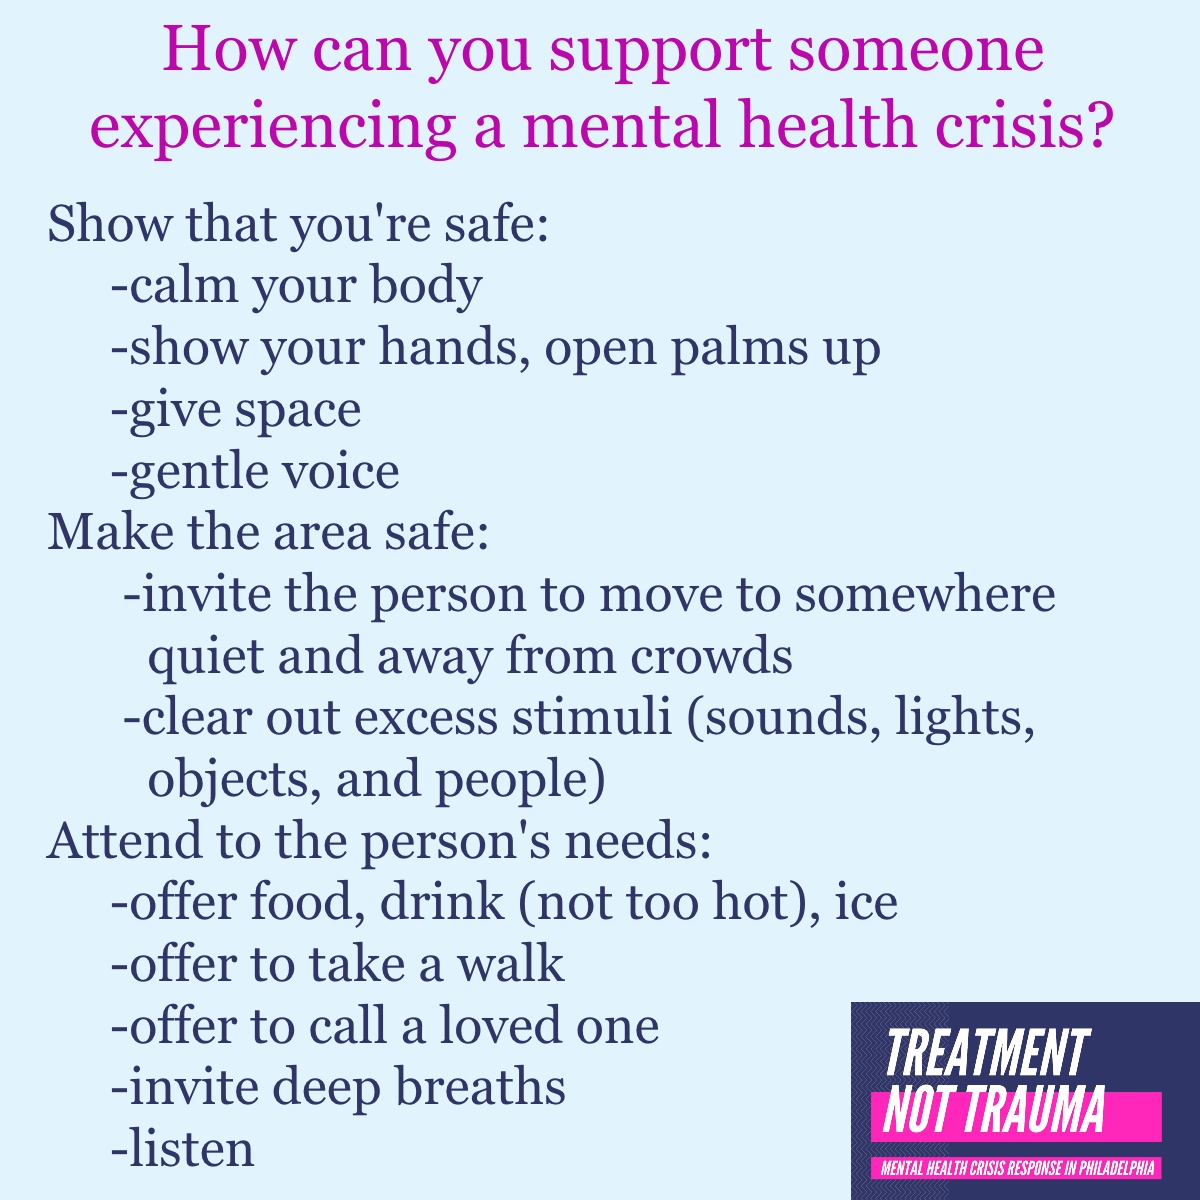 There are SO many ways to help someone experiencing a mental health crisis without harming them. Here are a few. #TreatmentNotTrauma #mentalHealth #deescalation #dignityandrespect #phillytherapist